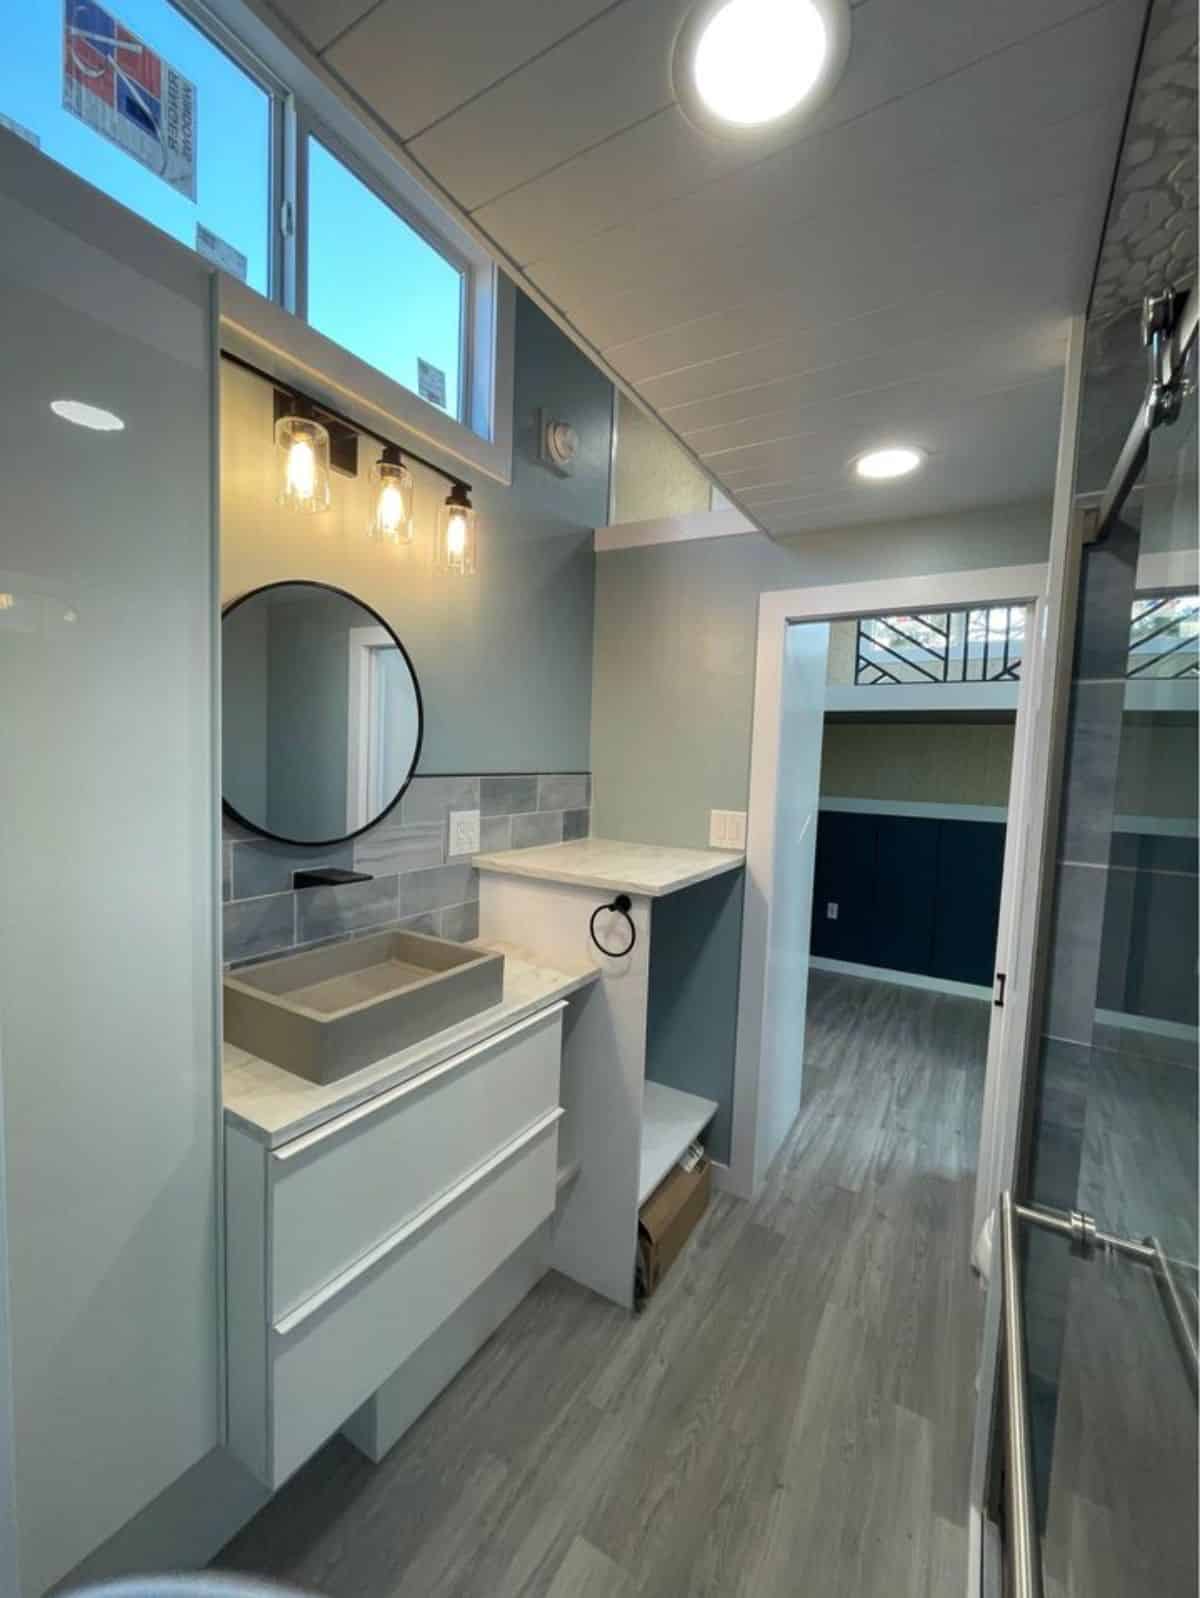 sink with vanity and mirror  & separate space for washer dryer combo in bathroom